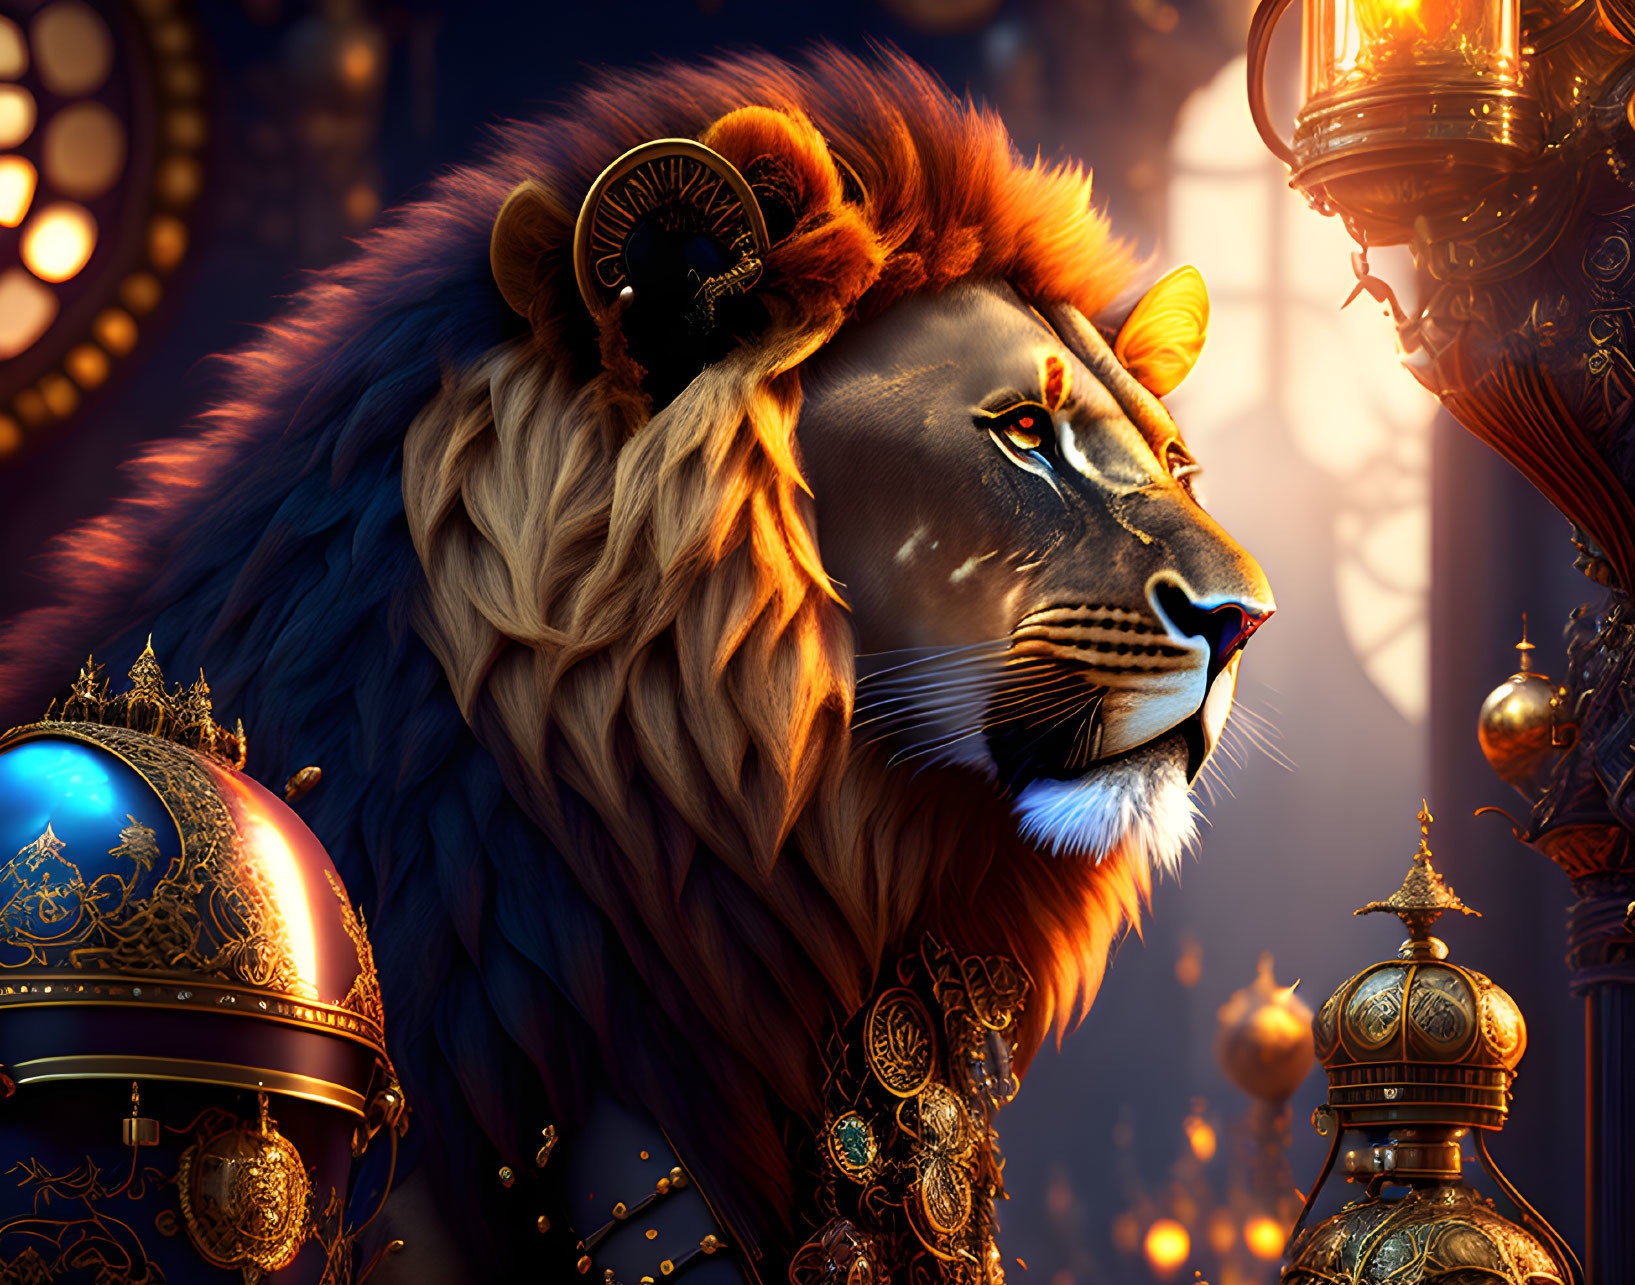 Majestic lion with ornate headdress and golden ornaments.